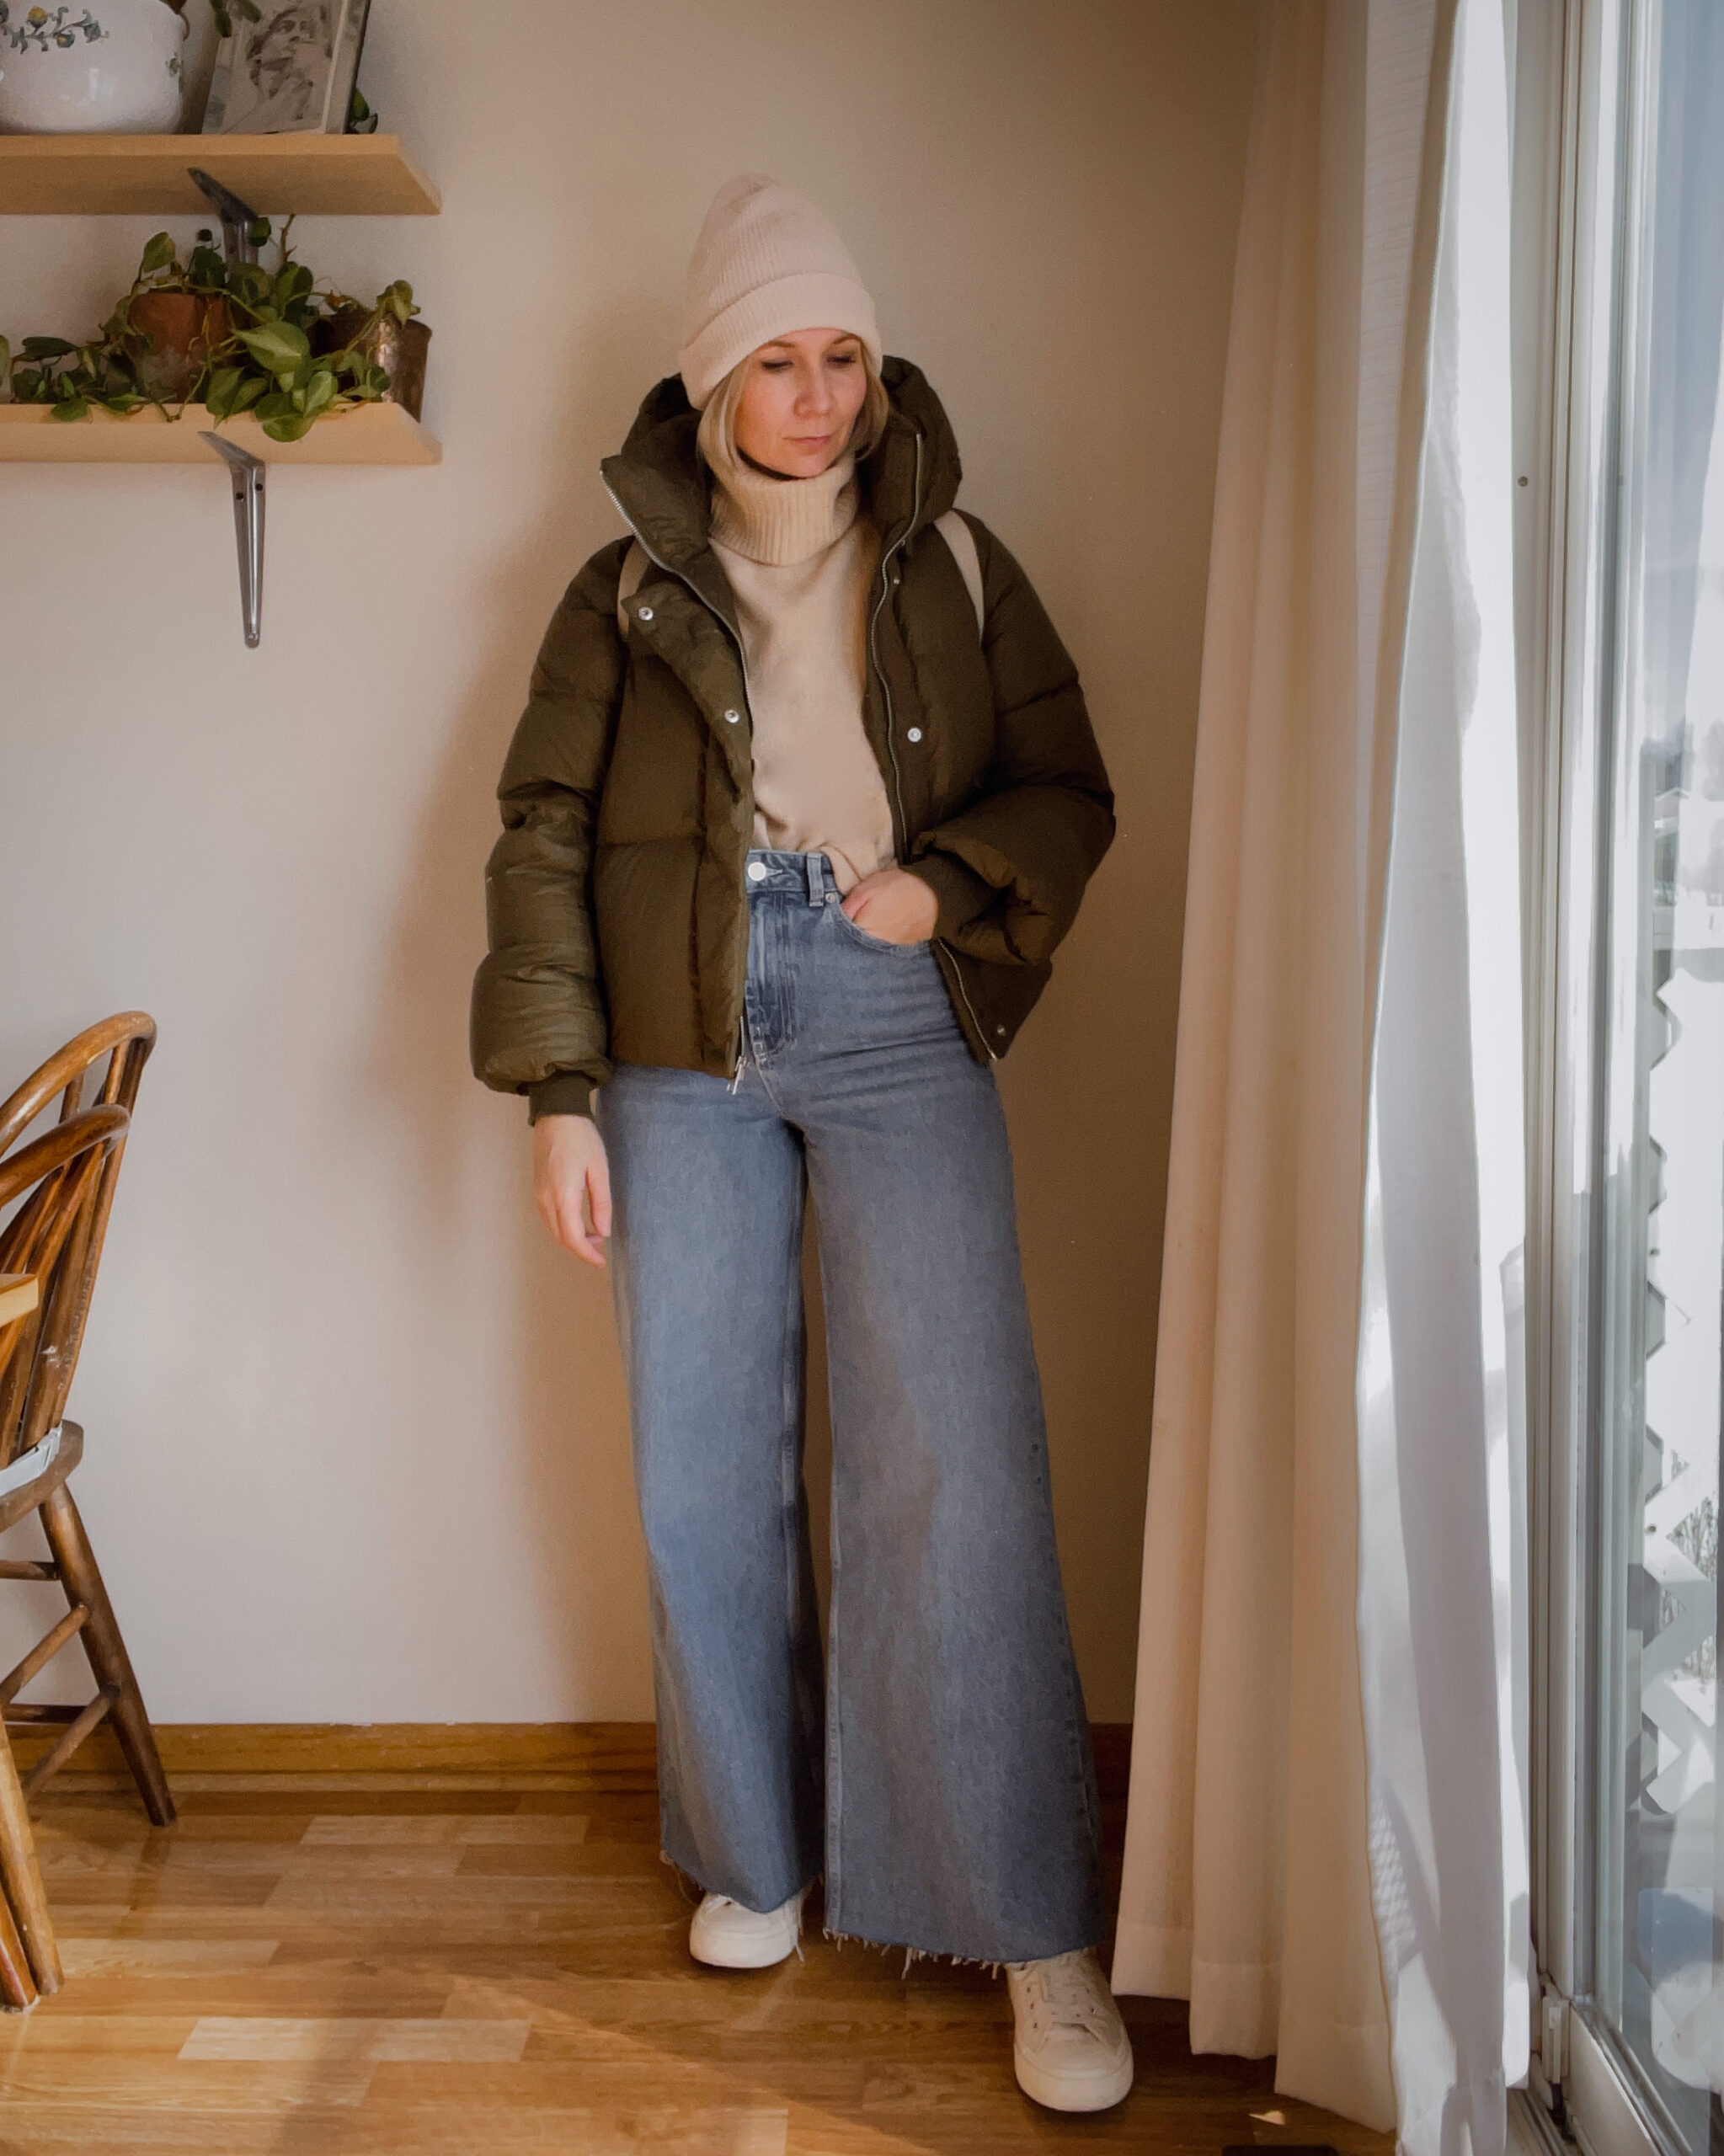 Karin Emily wears a cropped army green puffer coat, cream turtleneck sweater and winter hat, wide leg jeans, and off white converse